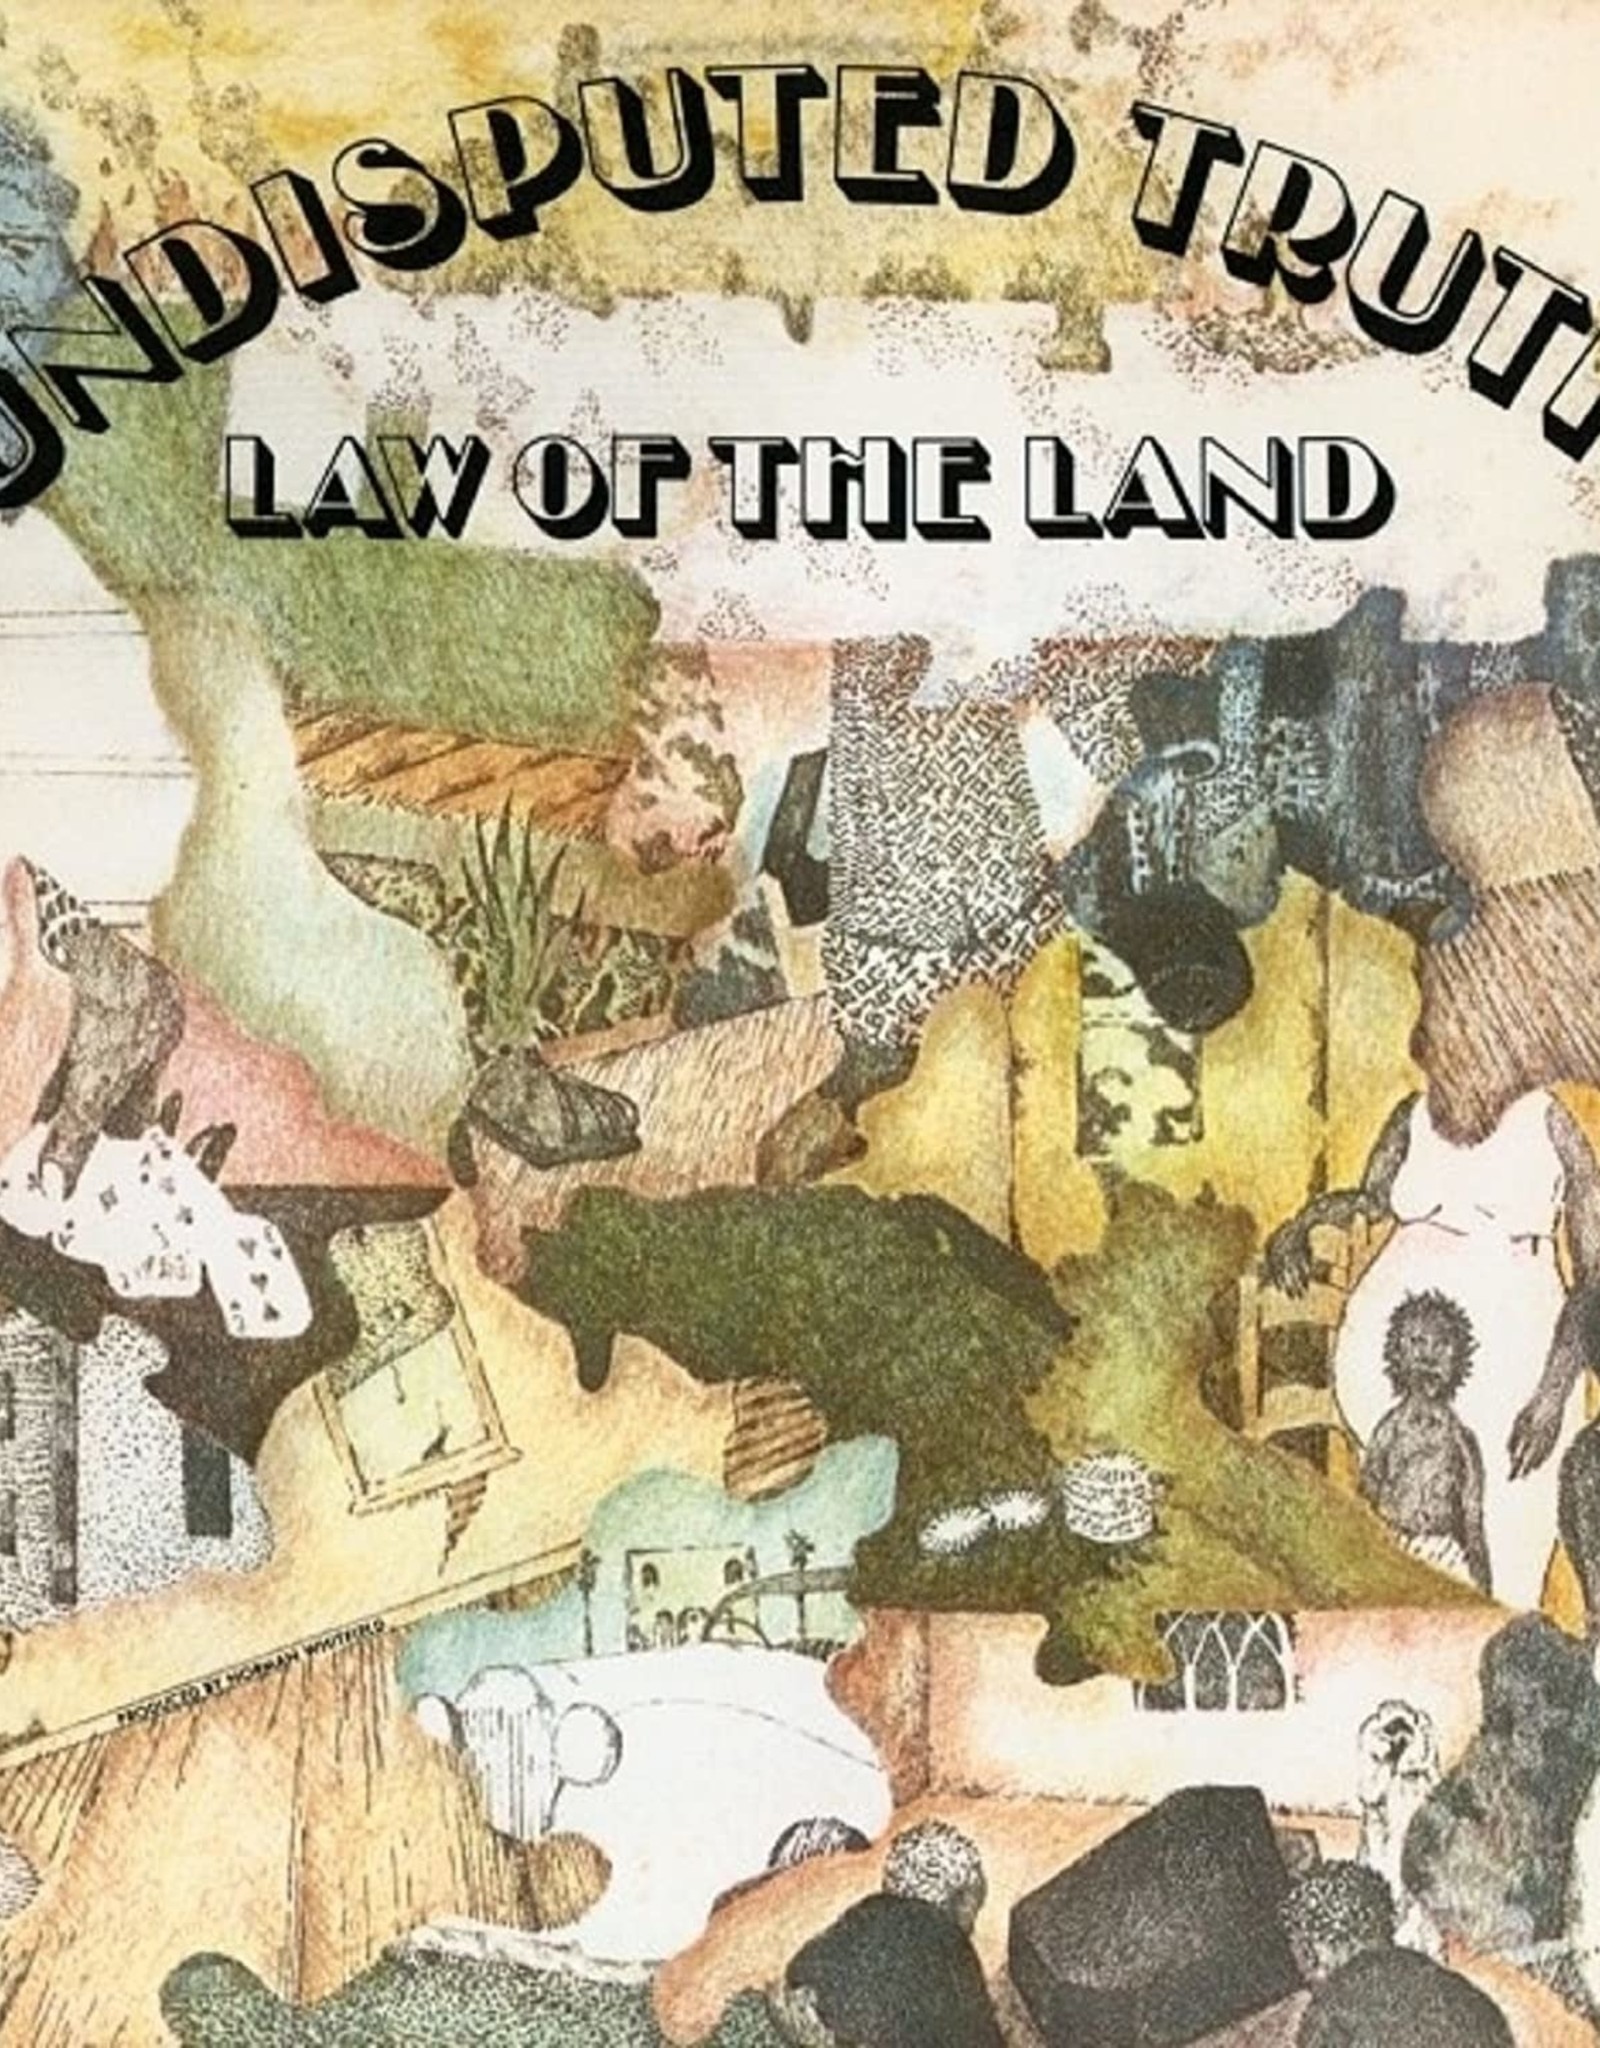 The Undisputed Truth - Law of the Land